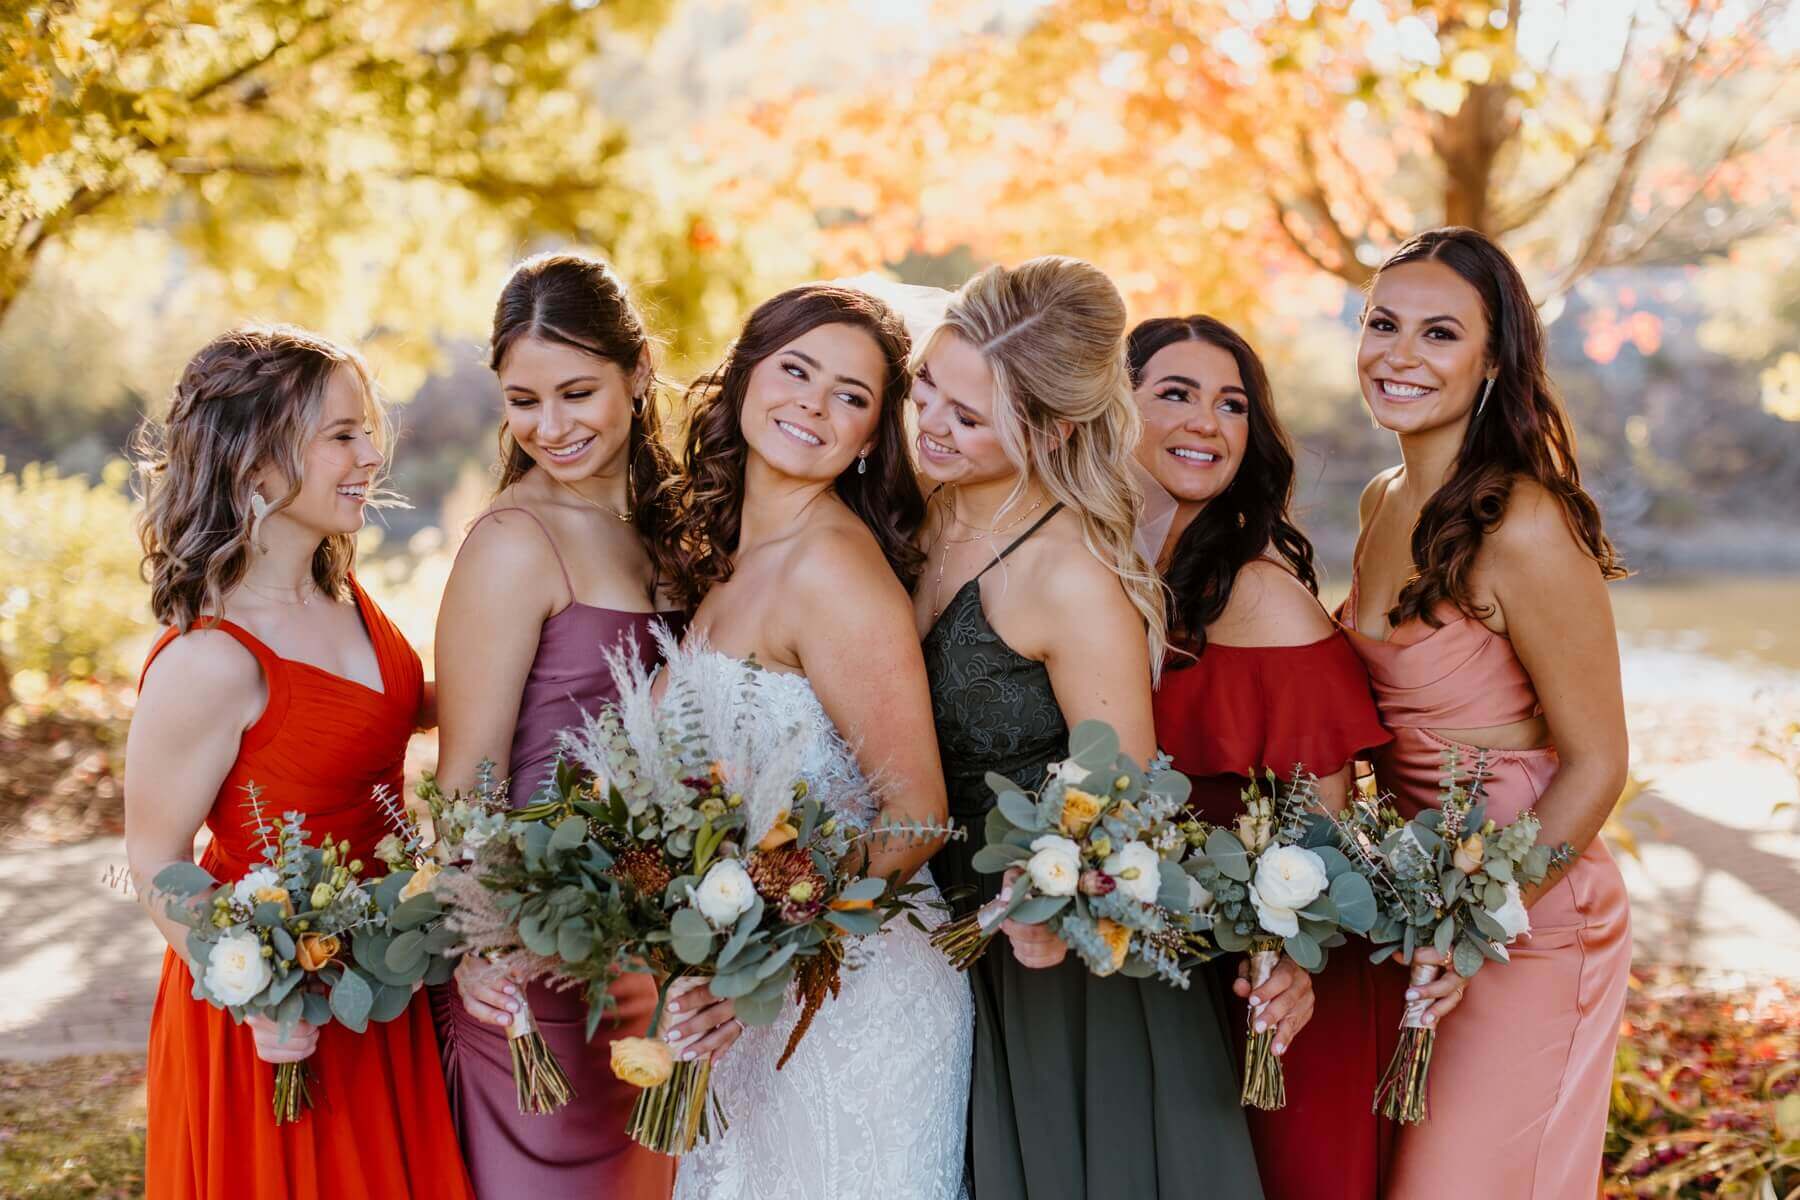 Bride with bridesmaids in mismatching dresses with boho bouquets